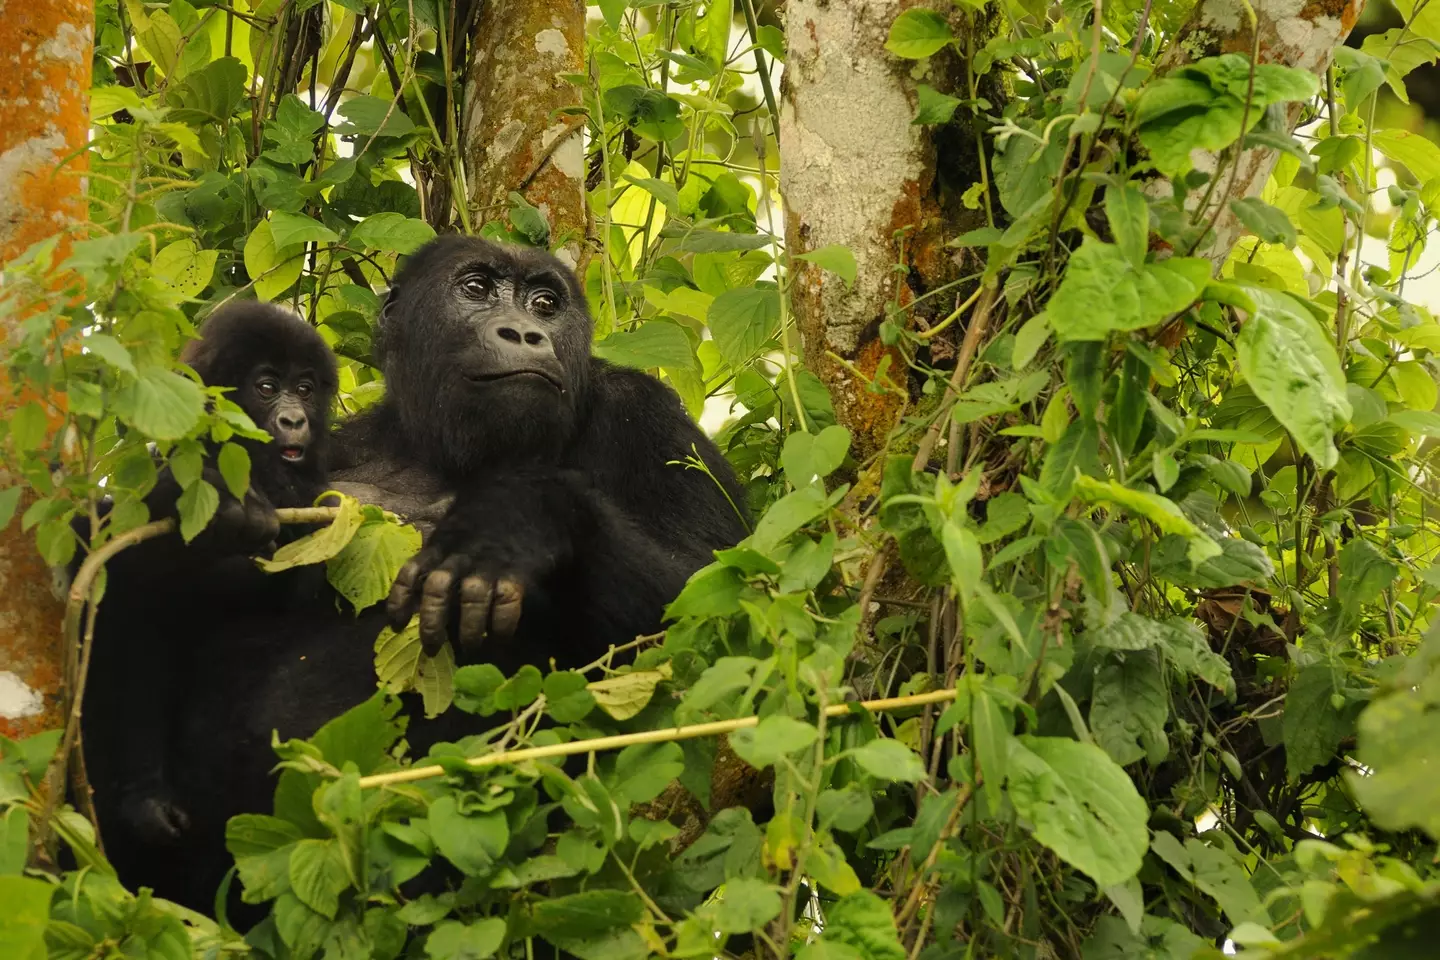 A new initiative to protect Grauer's gorillas in the eastern Democratic Republic of Congo has been introduced.